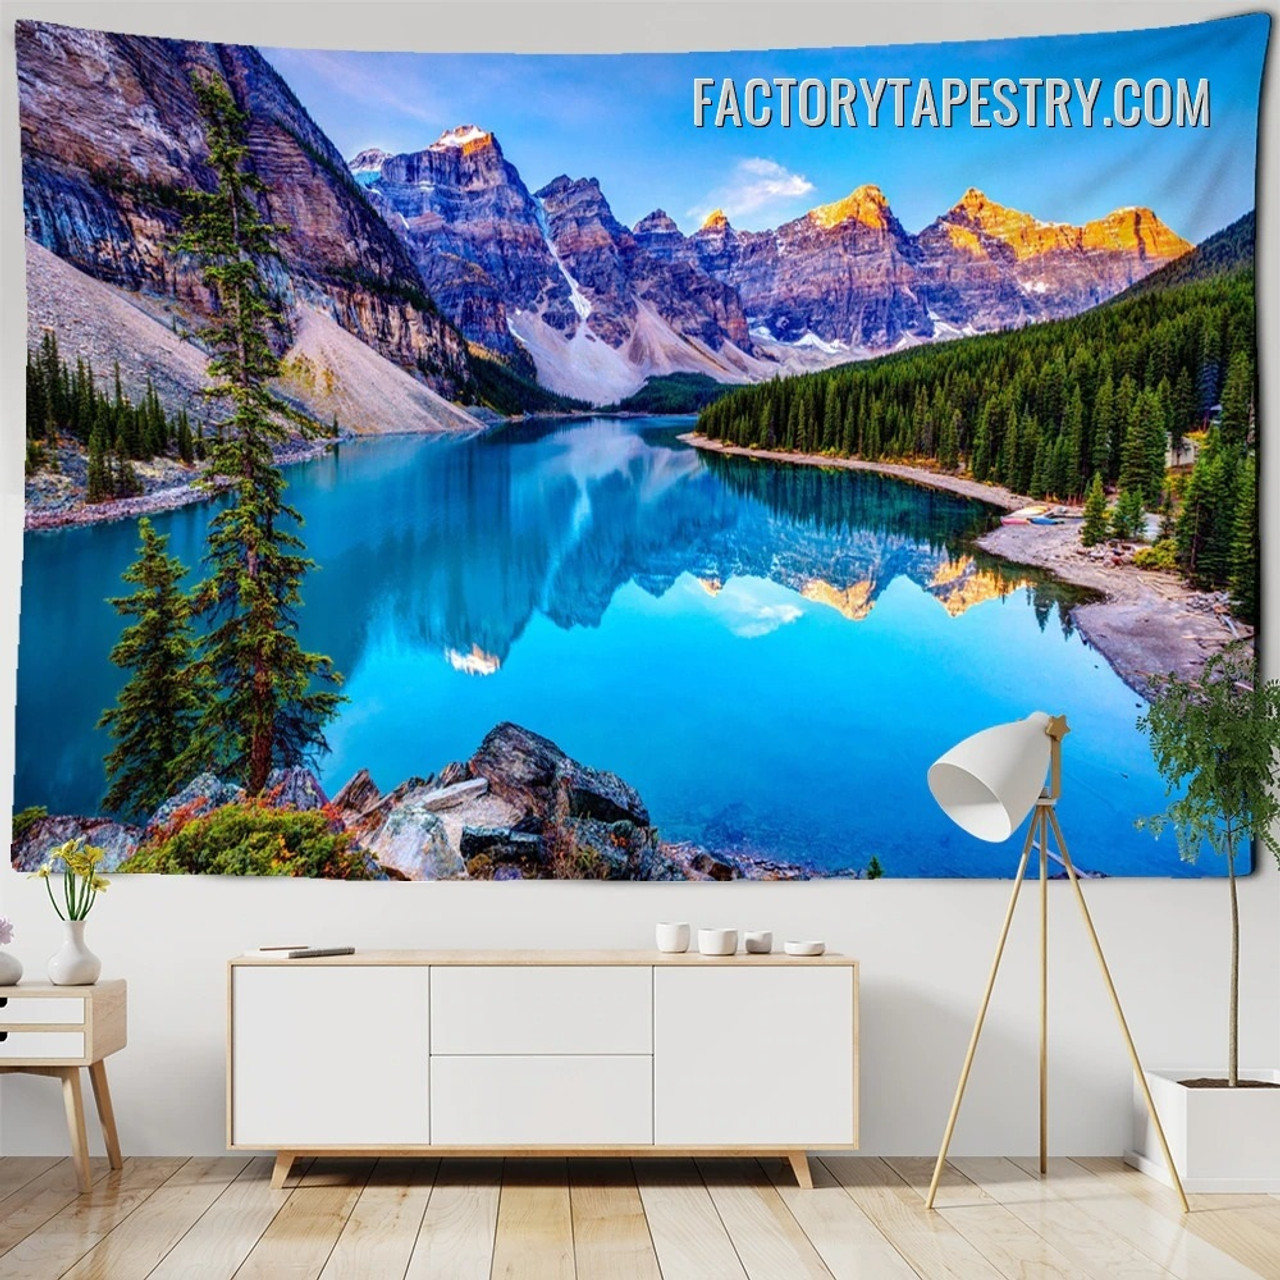 Seaside Scenery Nature Landscape Modern Wall Hanging Tapestry for Living Room